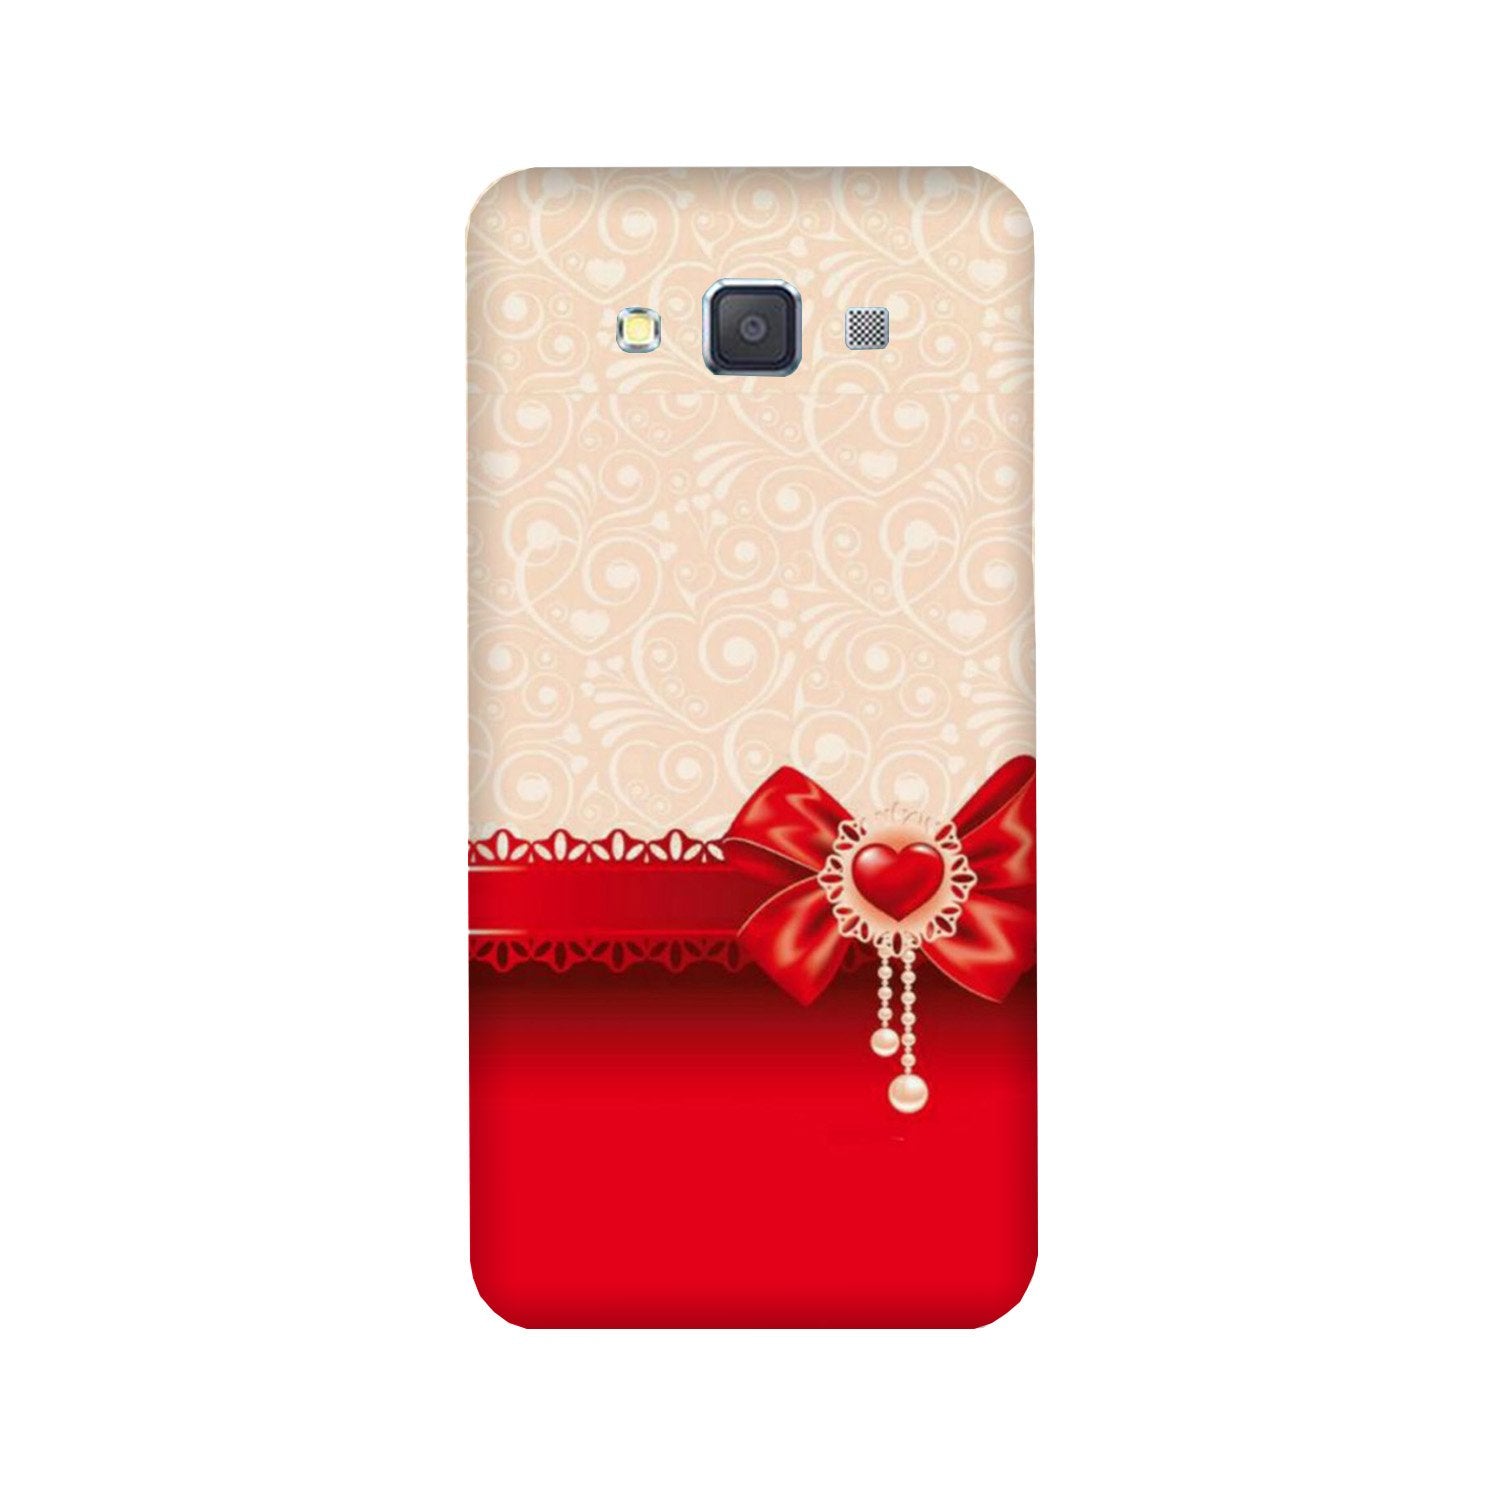 Gift Wrap3 Case for Galaxy ON5/ON5 Pro